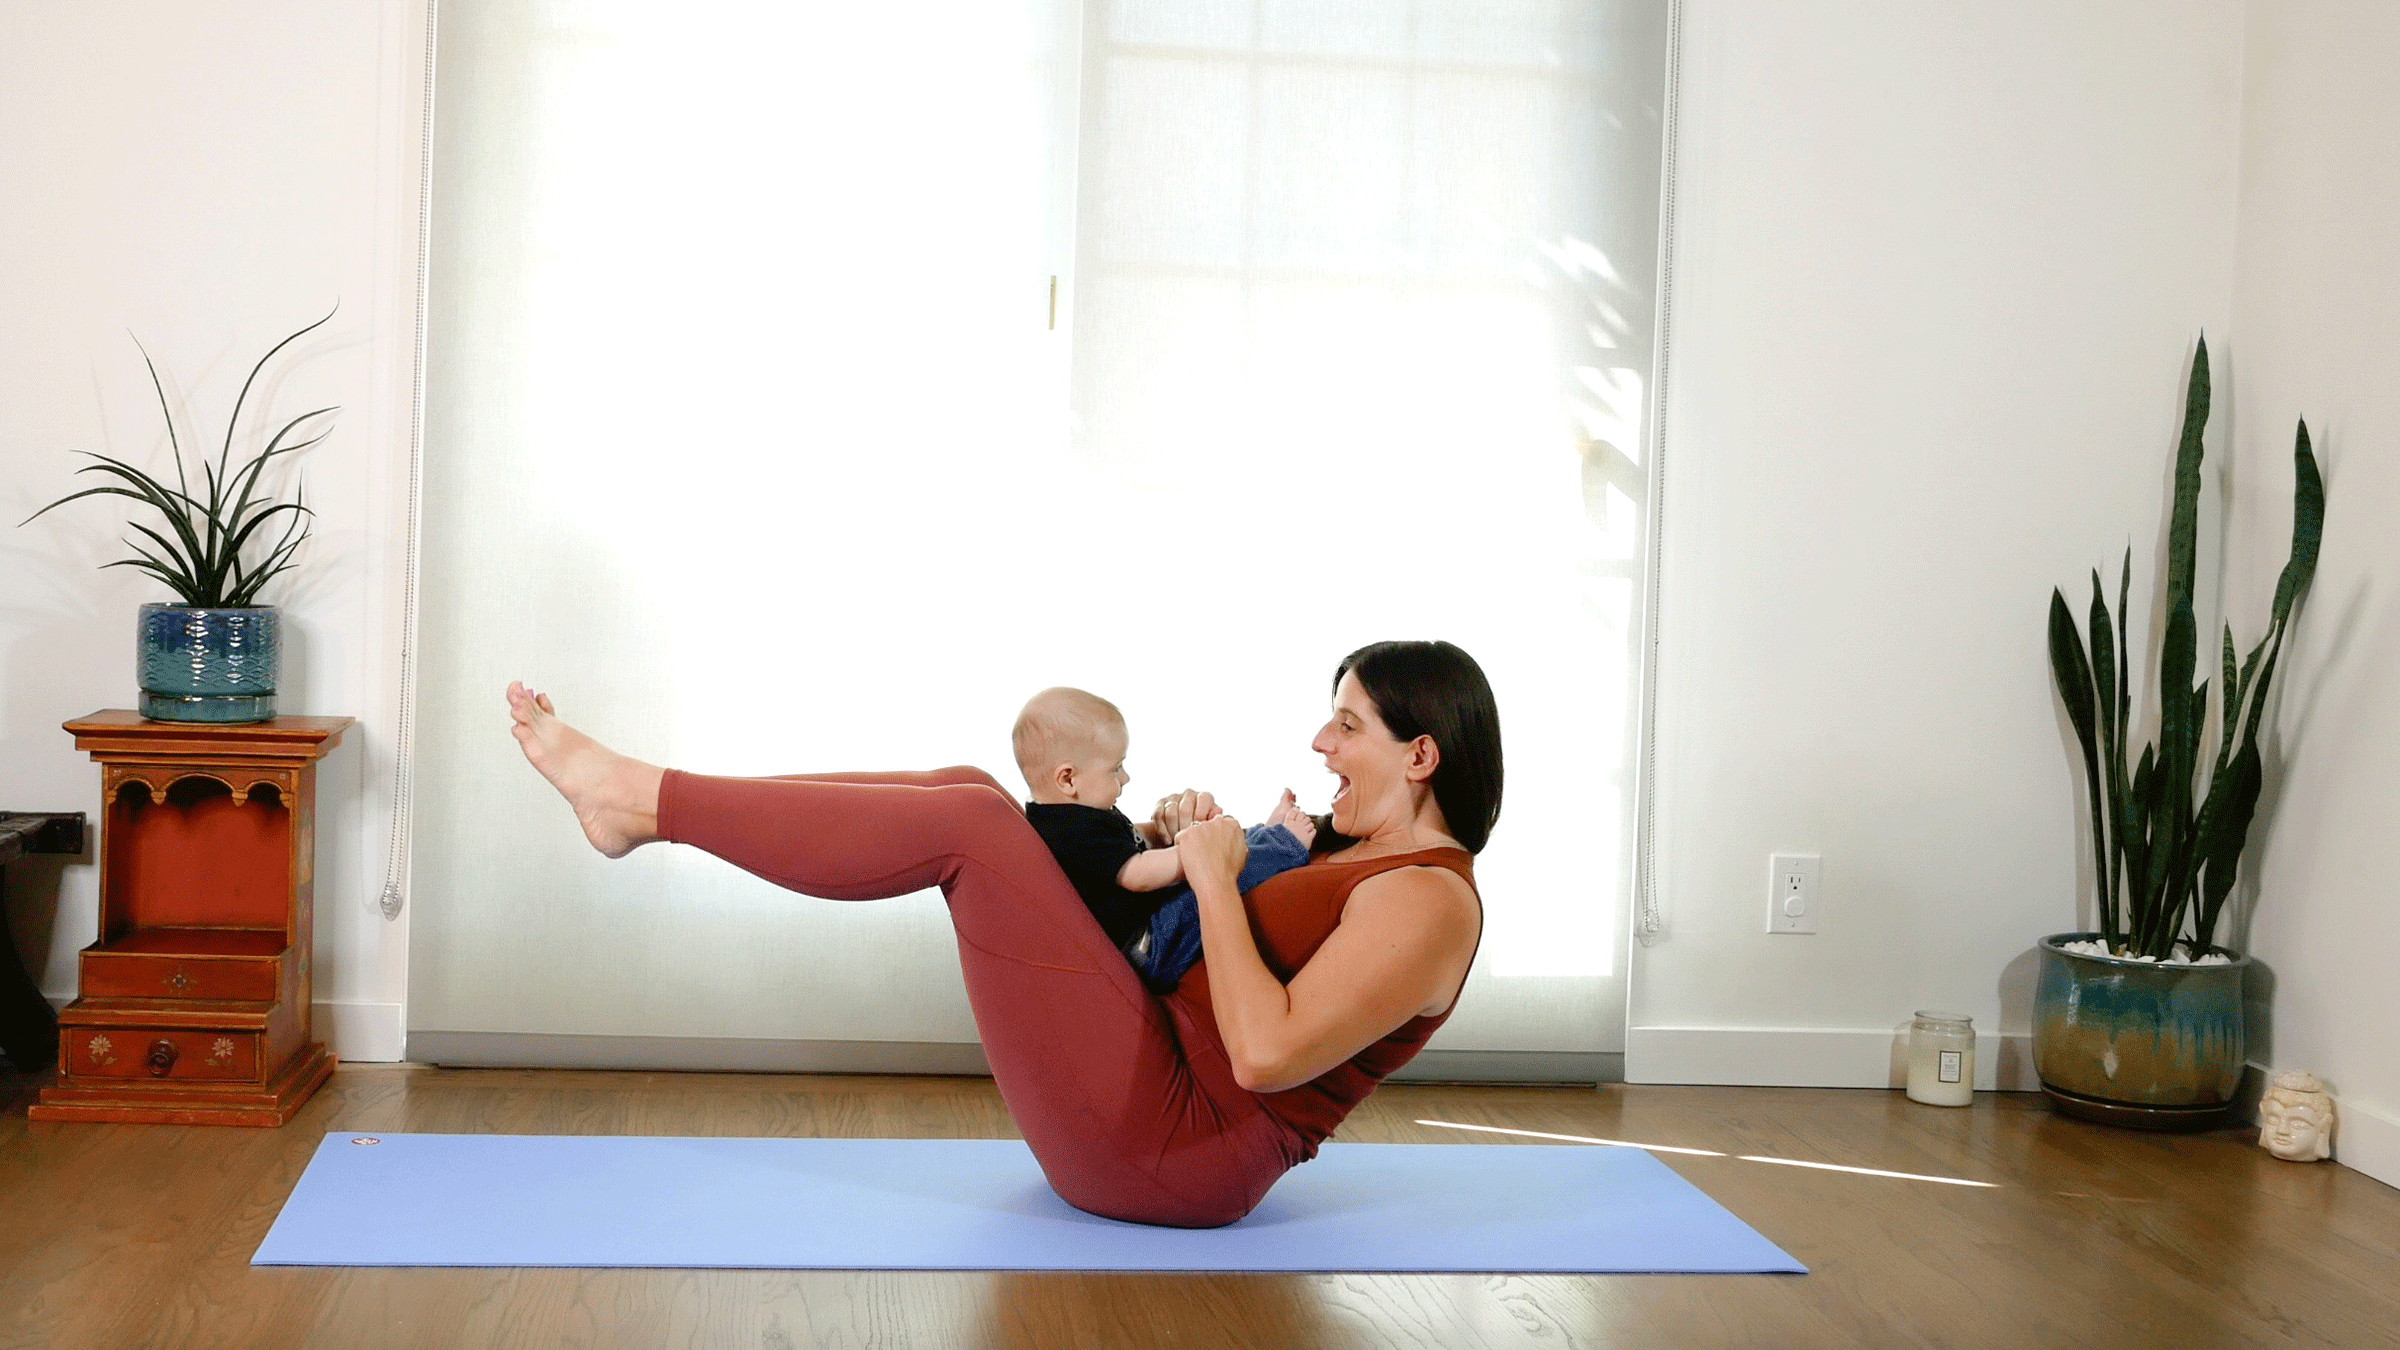 Baby Yoga: How to get started - Minnesota Parent